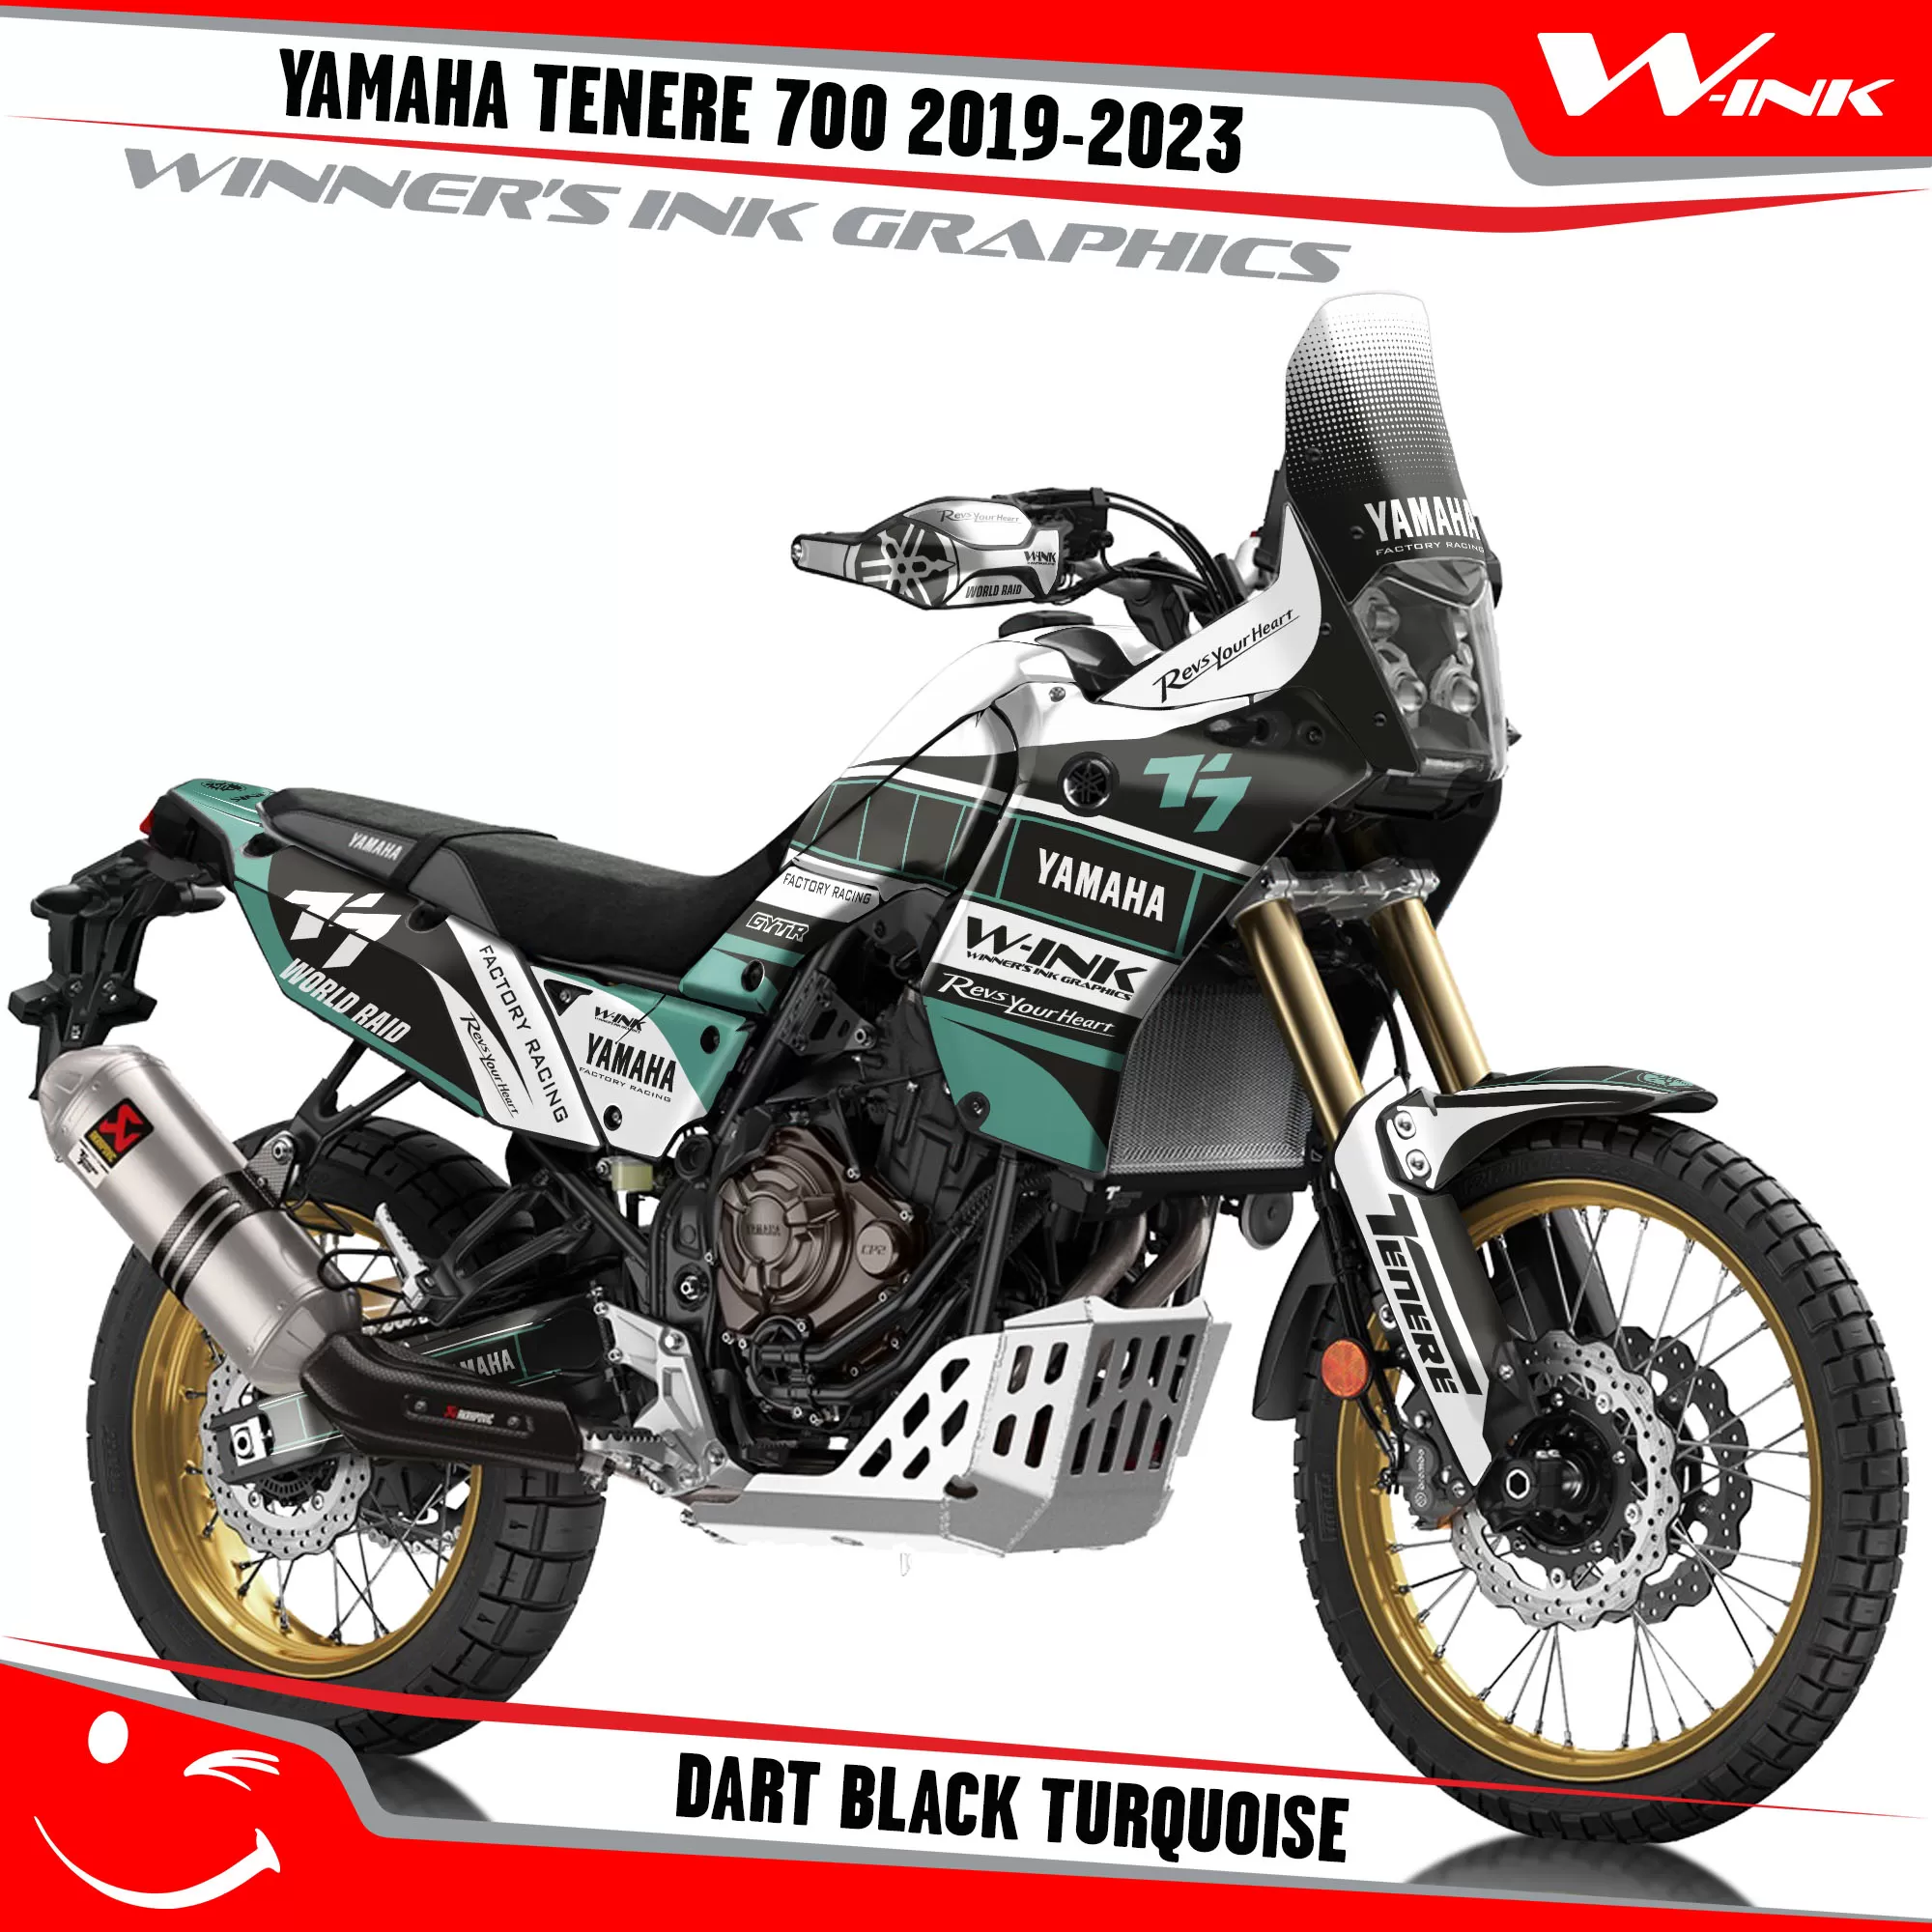 Yamaha-Tenere-700-2019-2020-2021-2022-2023-graphics-kit-and-decals-with-desing-Dart-Black-Turquoise